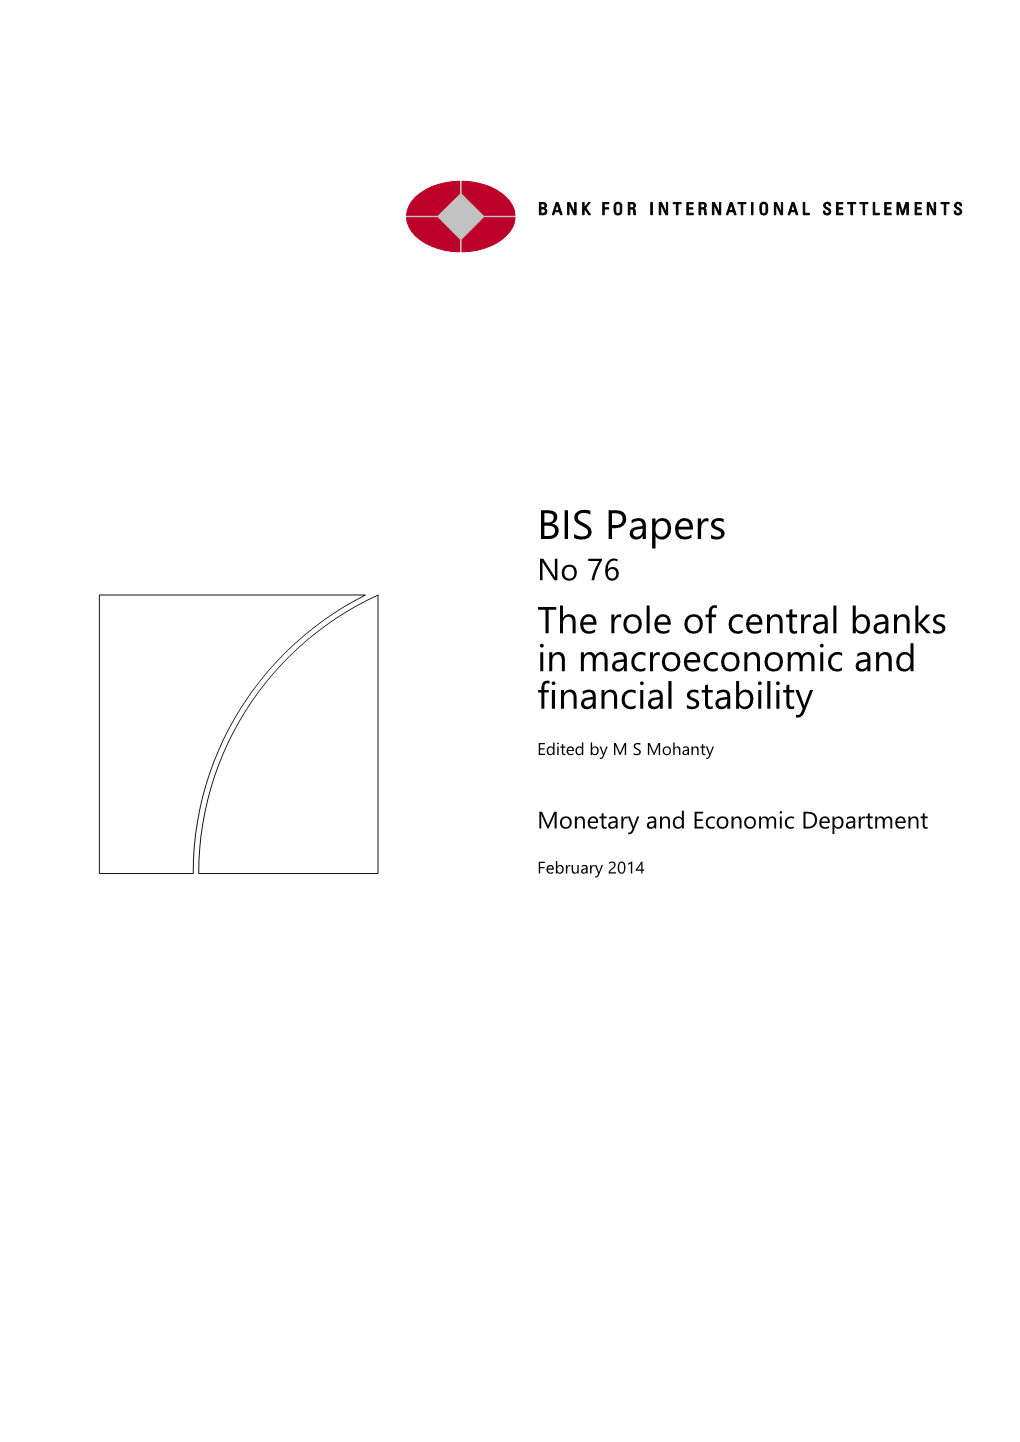 The Role of Central Banks in Macroeconomic and Financial Stability